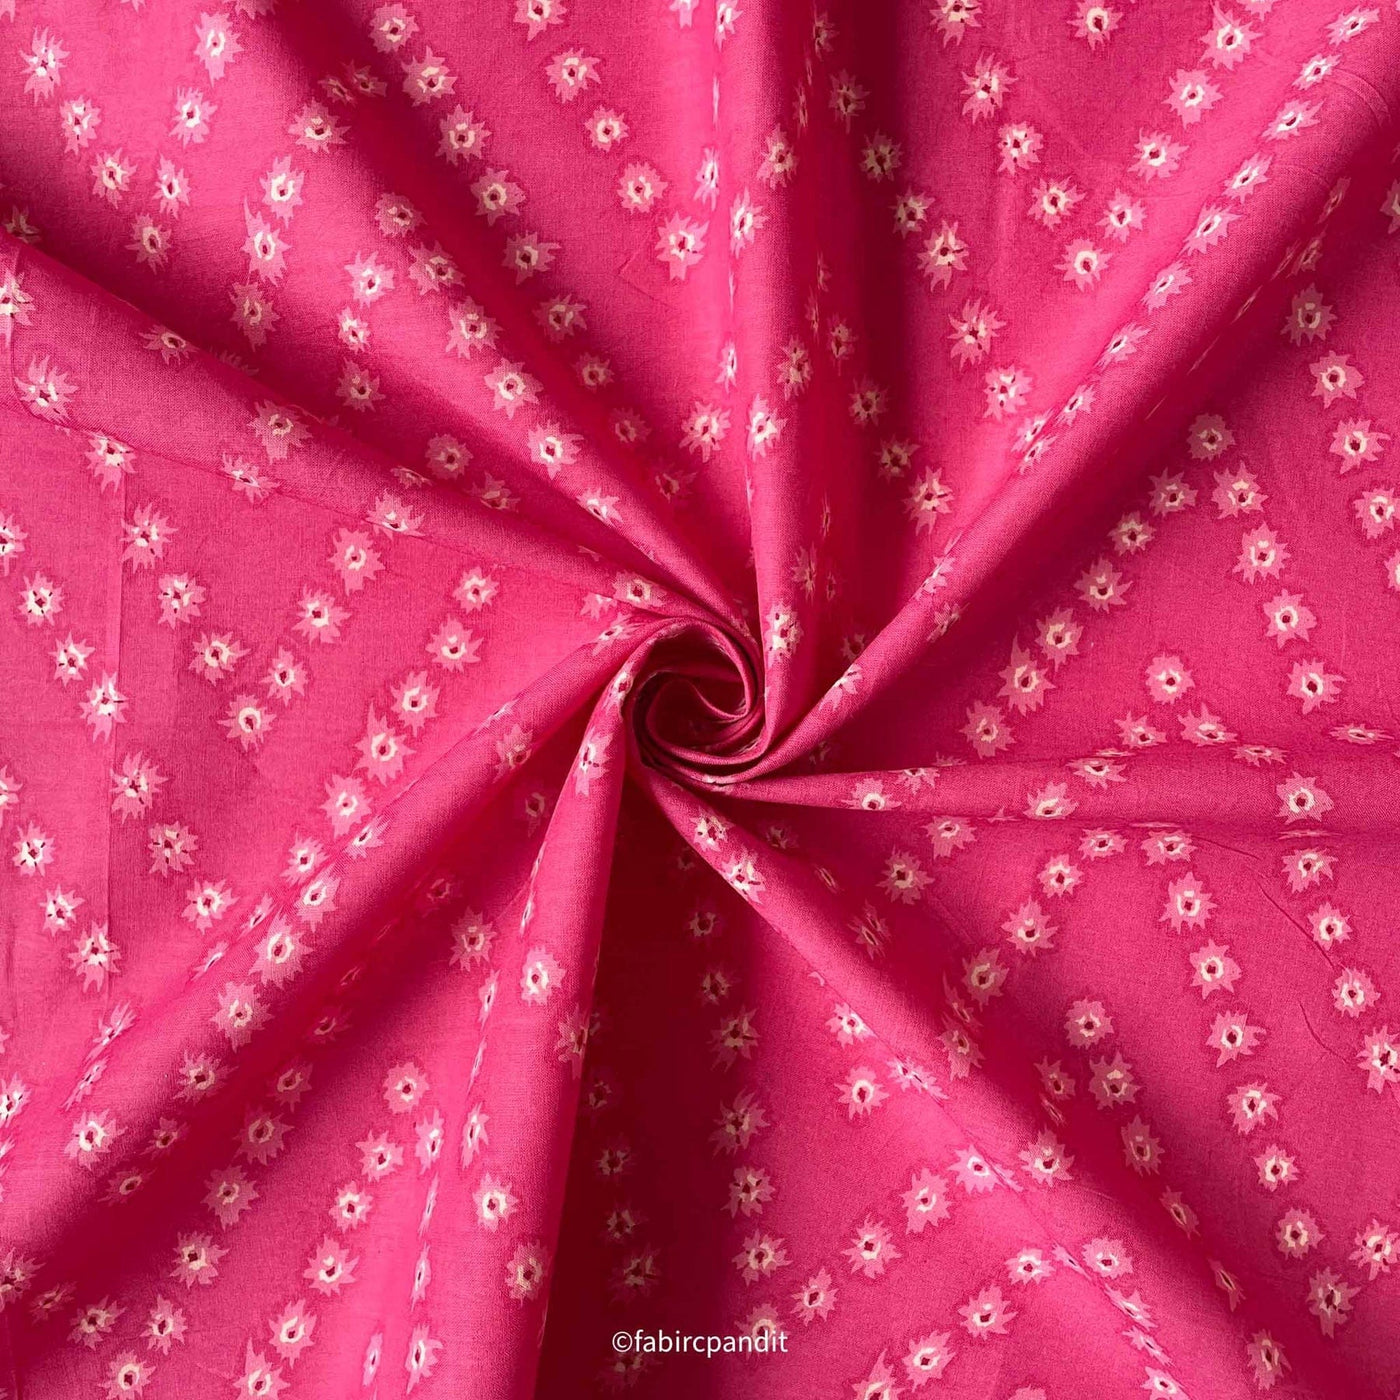 Fabric Pandit Fabric Deep Pink and Cream Abstract Zig-Zig Hand Block Printed Pure Cotton Fabric (Width 43 inches)